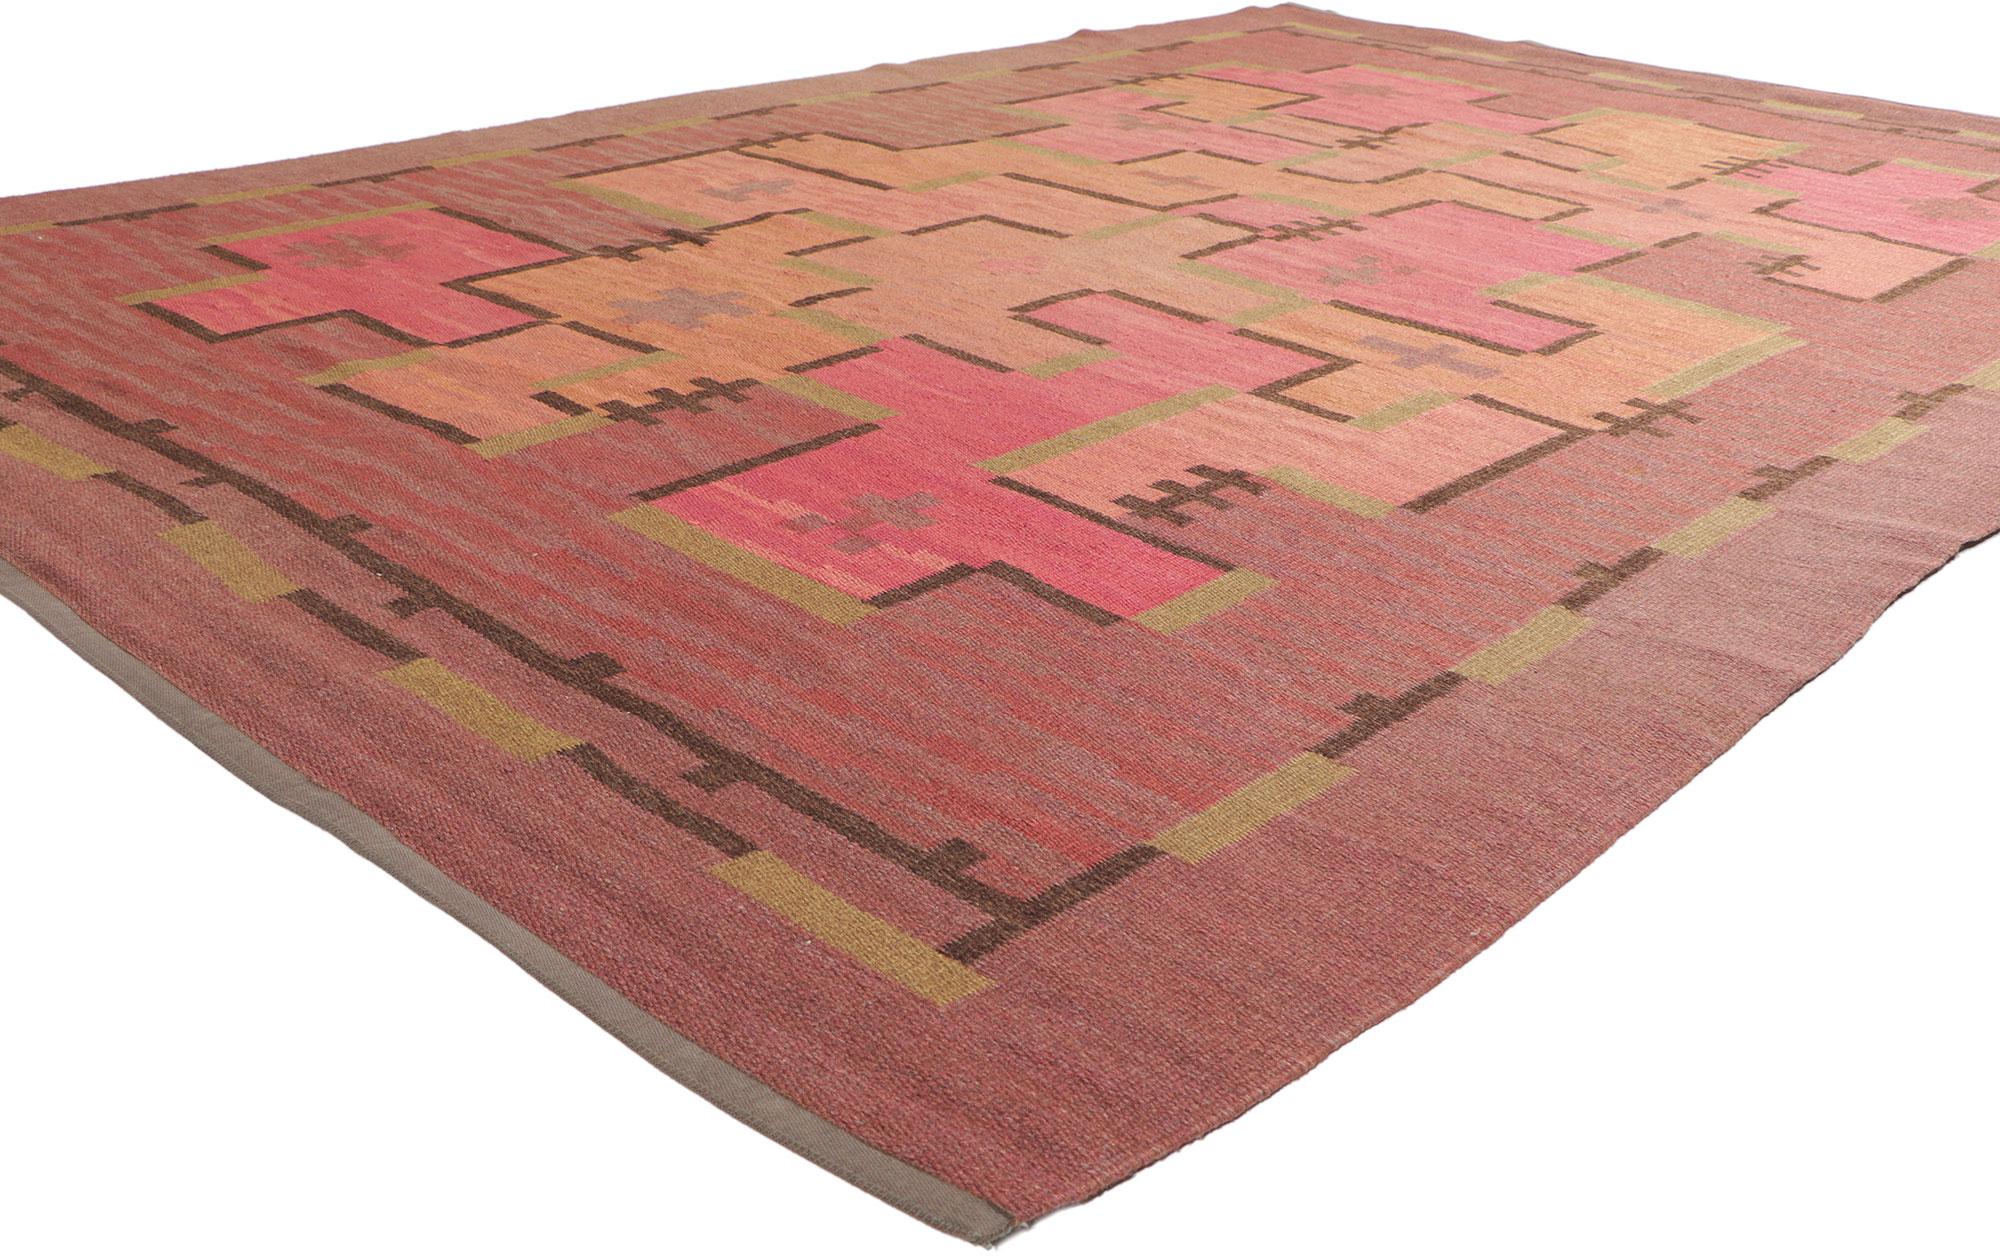 78476 Impi Sotavalta Vintage Finnish Flatweave, 06'06 x 09'07. Bold Art Deco meets Bauhaus simplicity in this handwoven Finnish flatweave rug. The eye-catching conceptual design and earthy colorway woven into this piece work together creating a